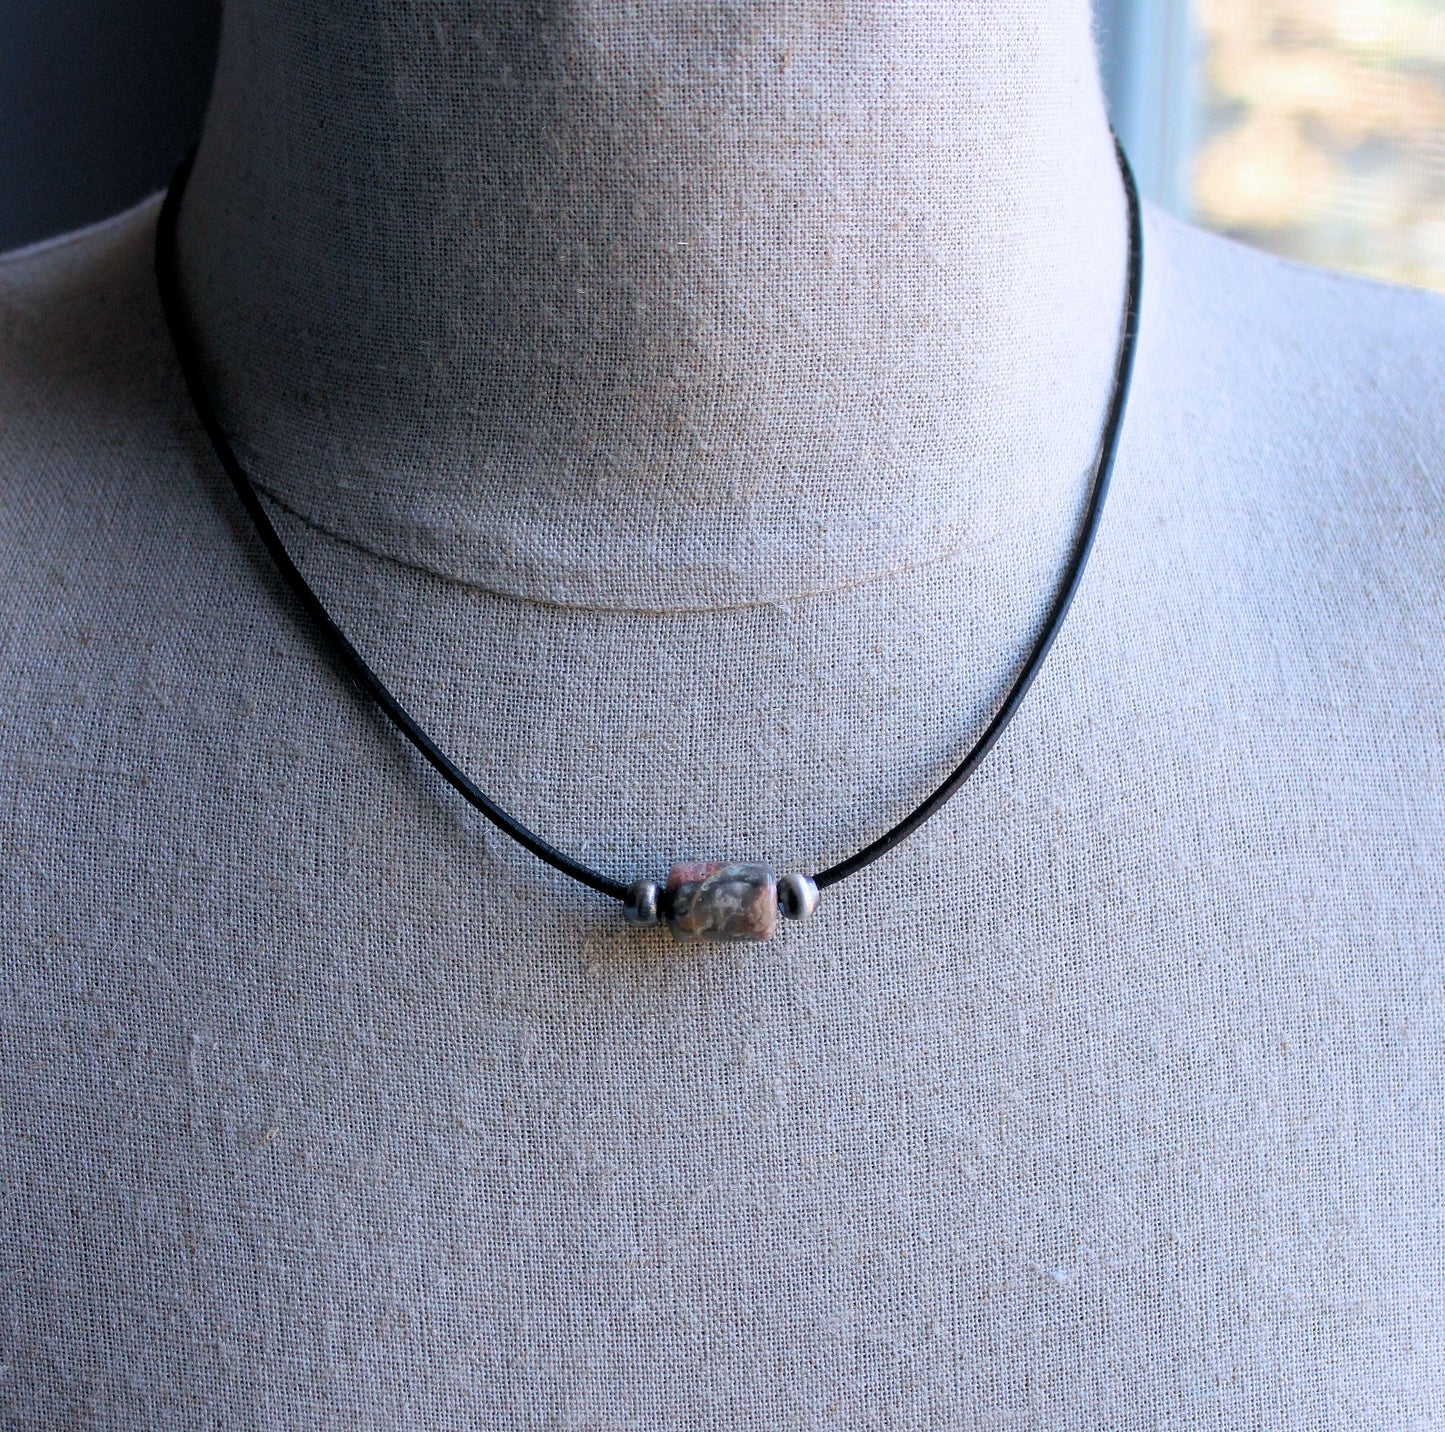 men's thin leather cord necklace